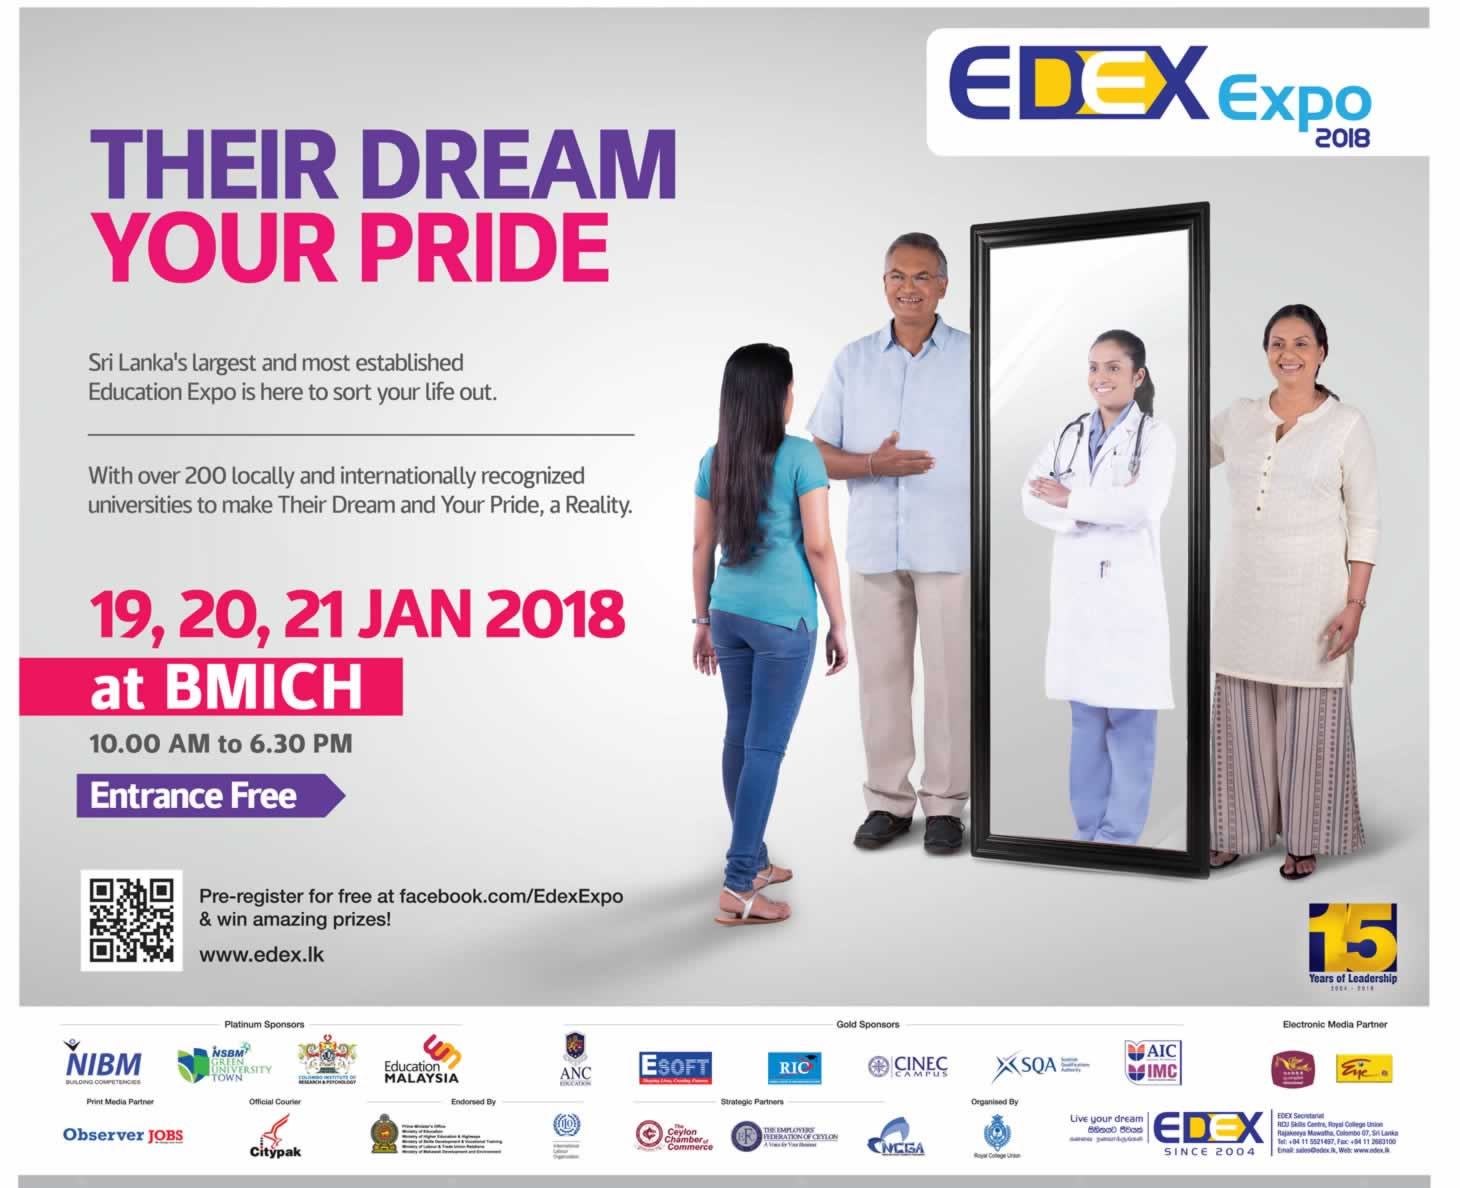 EDEC Expo 2018 – Educational Exhibition at BMICH